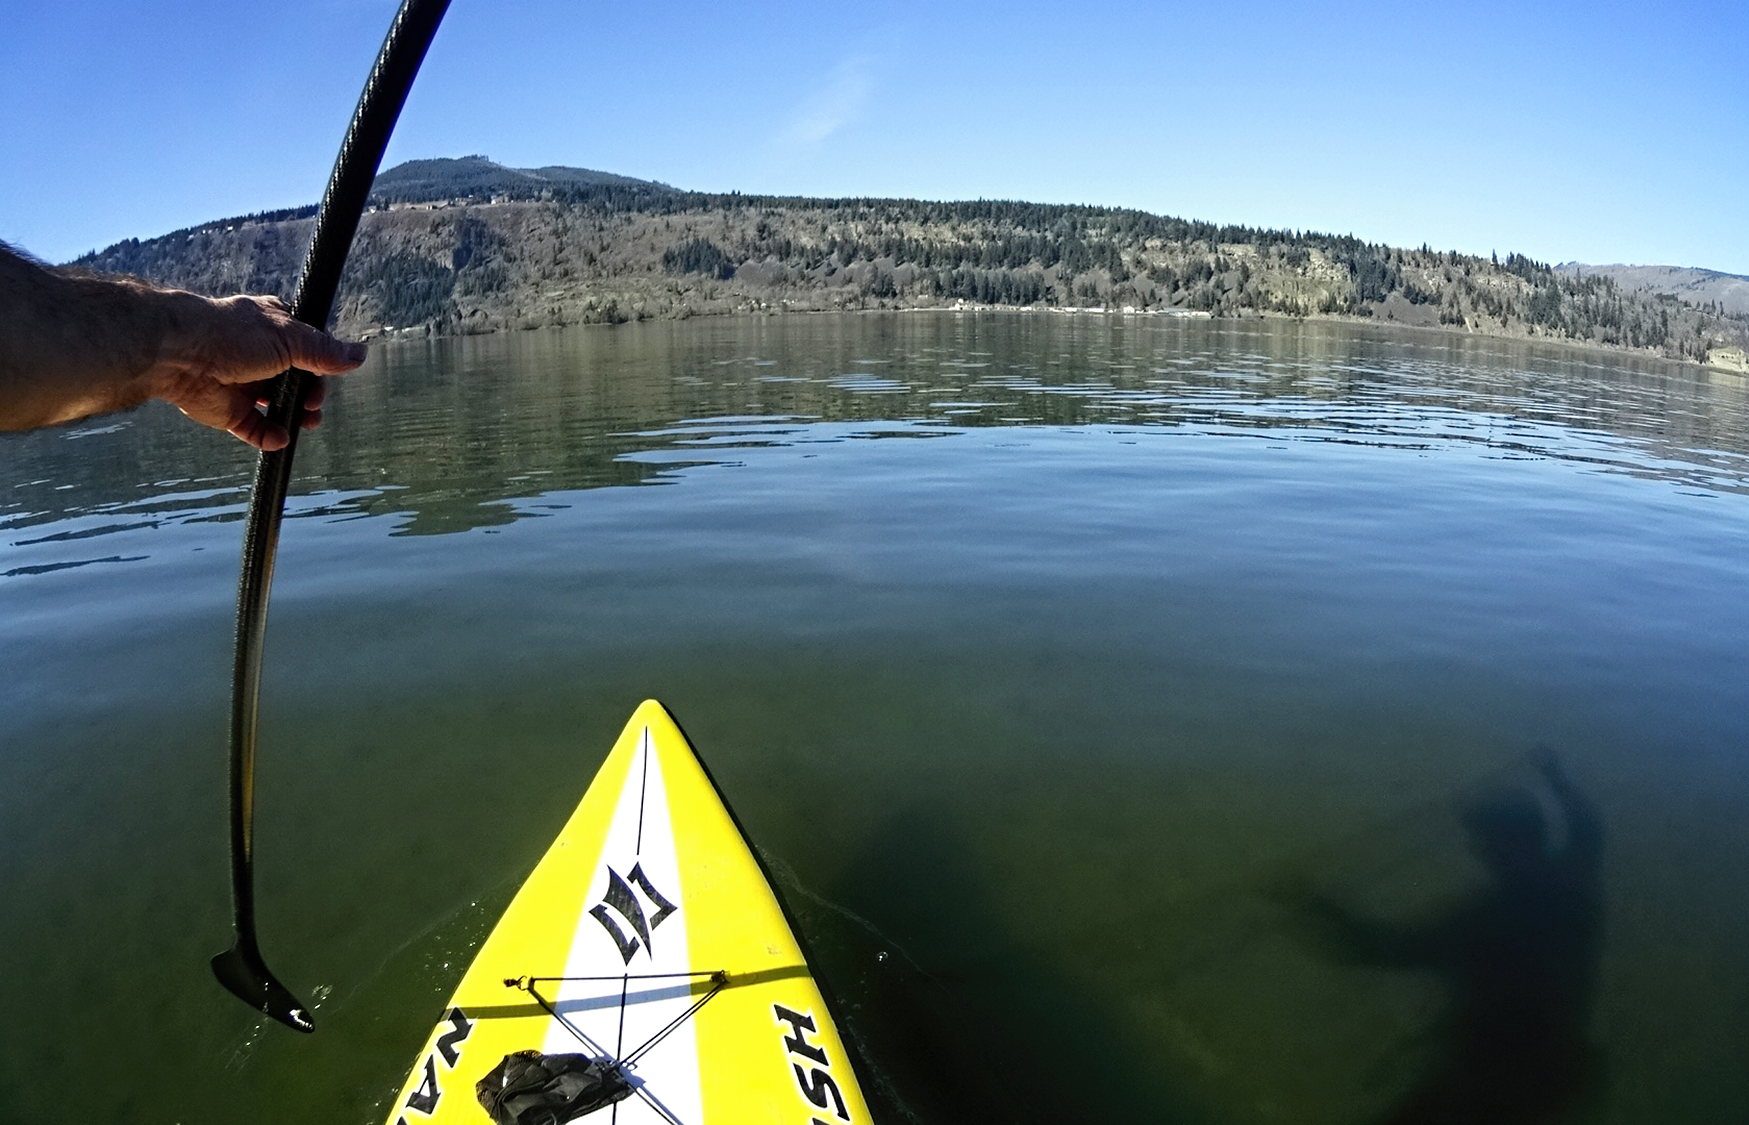 the view from a kayak of a mountain range and a man's hand holding an oar on water